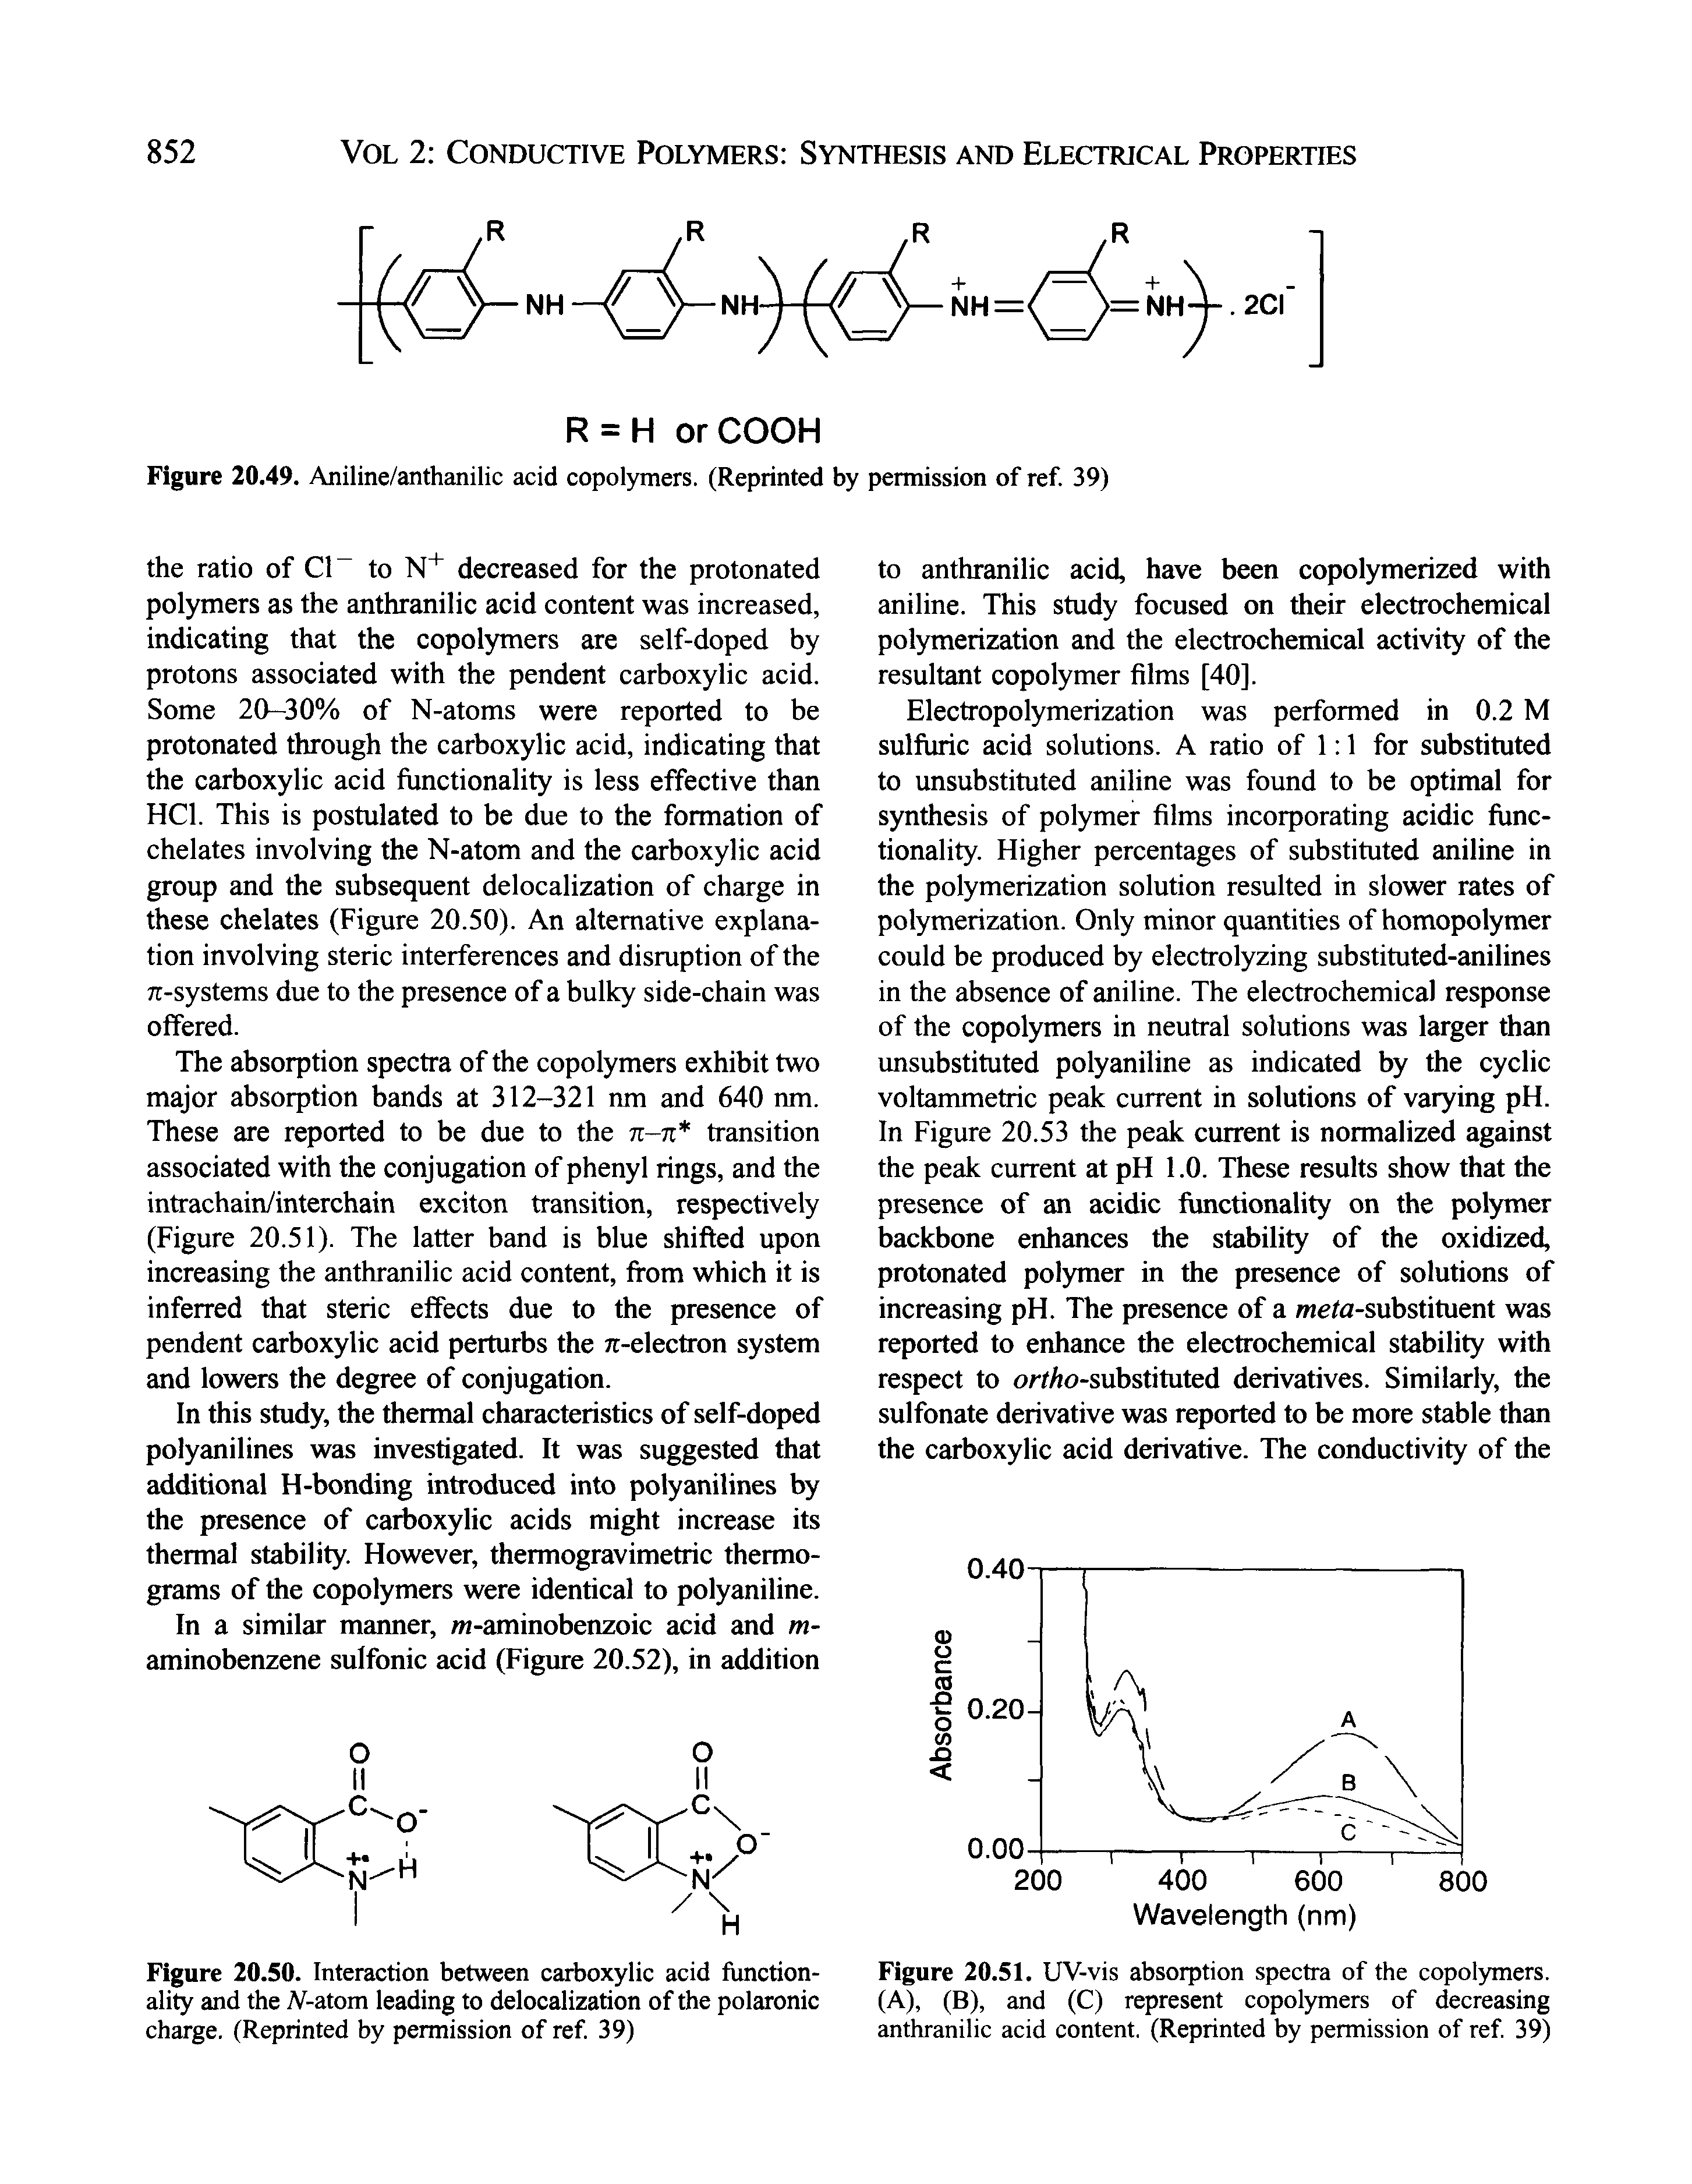 Figure 20.50. Interaction between carboxylic acid functionality and the V-atom leading to delocalization of the polaronic charge. (Reprinted by permission of ref 39)...